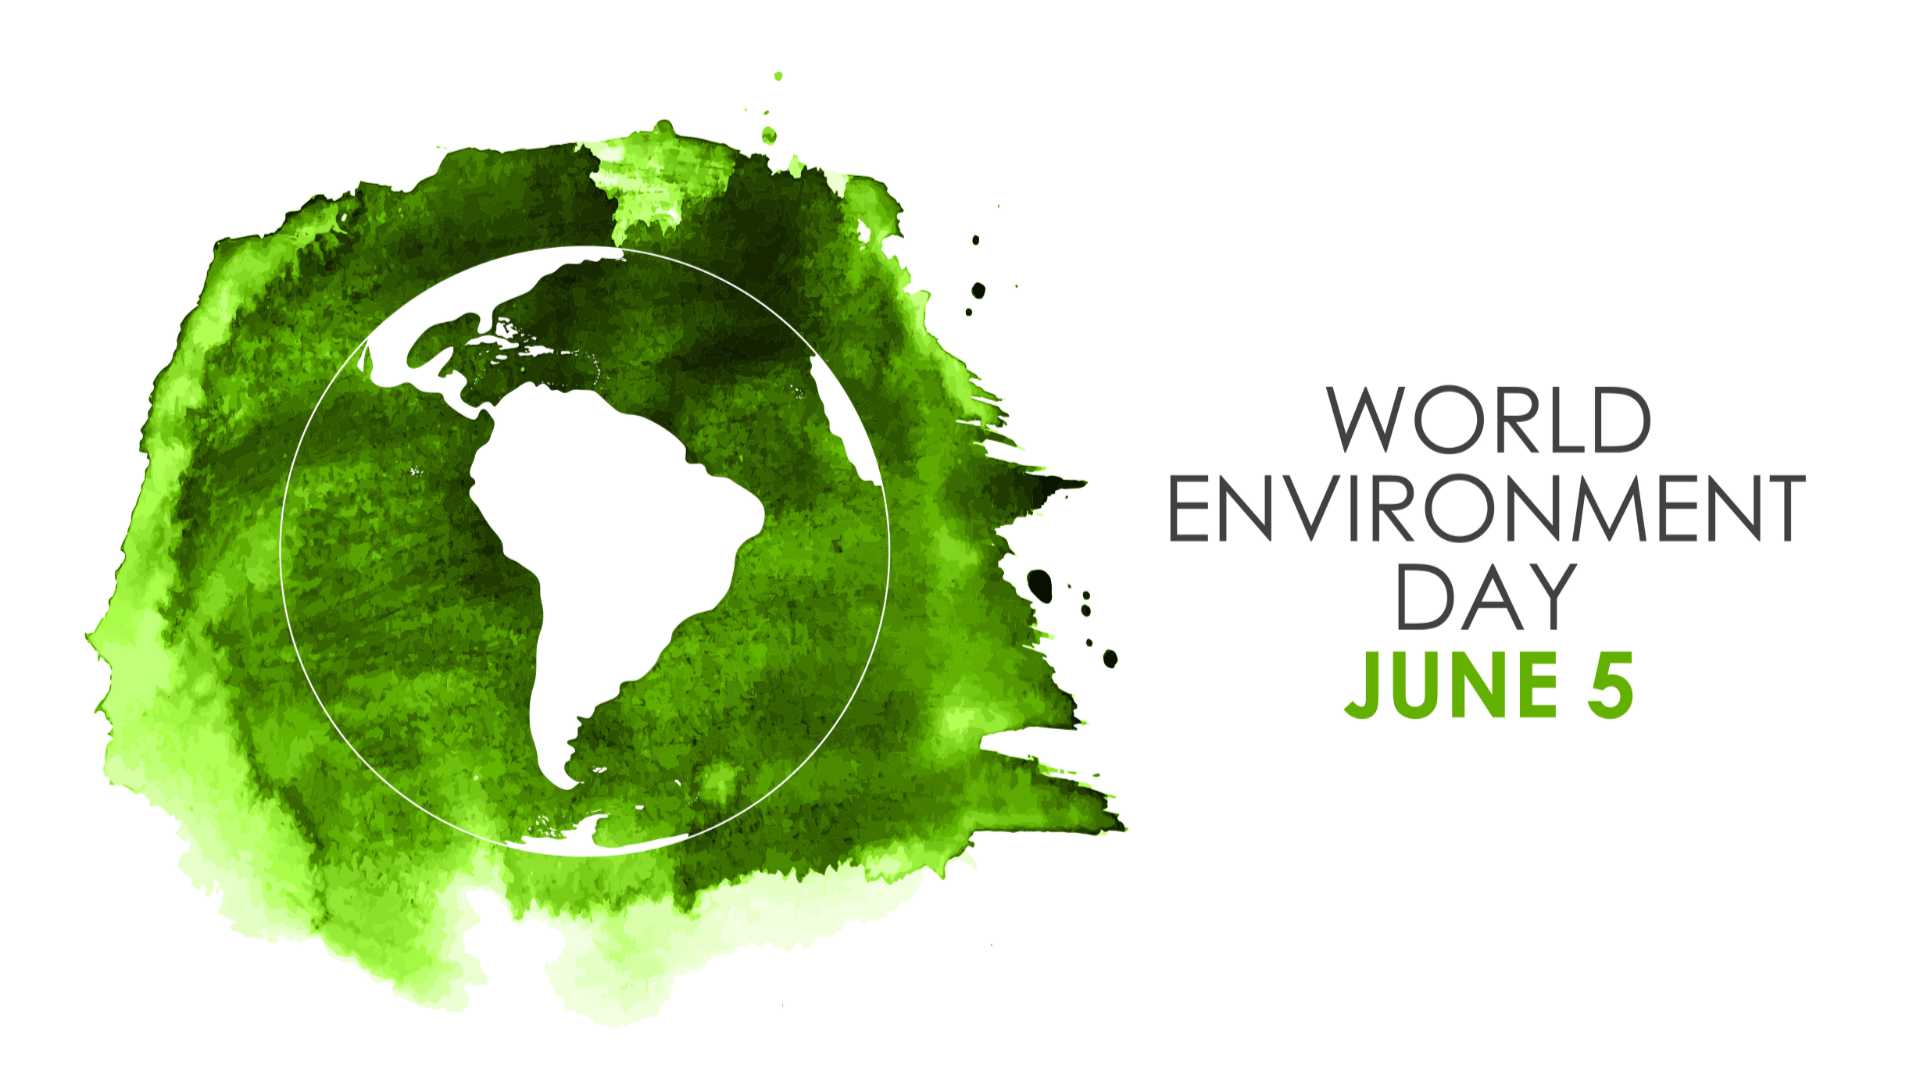 world environment day - june 5 - logo and infographic